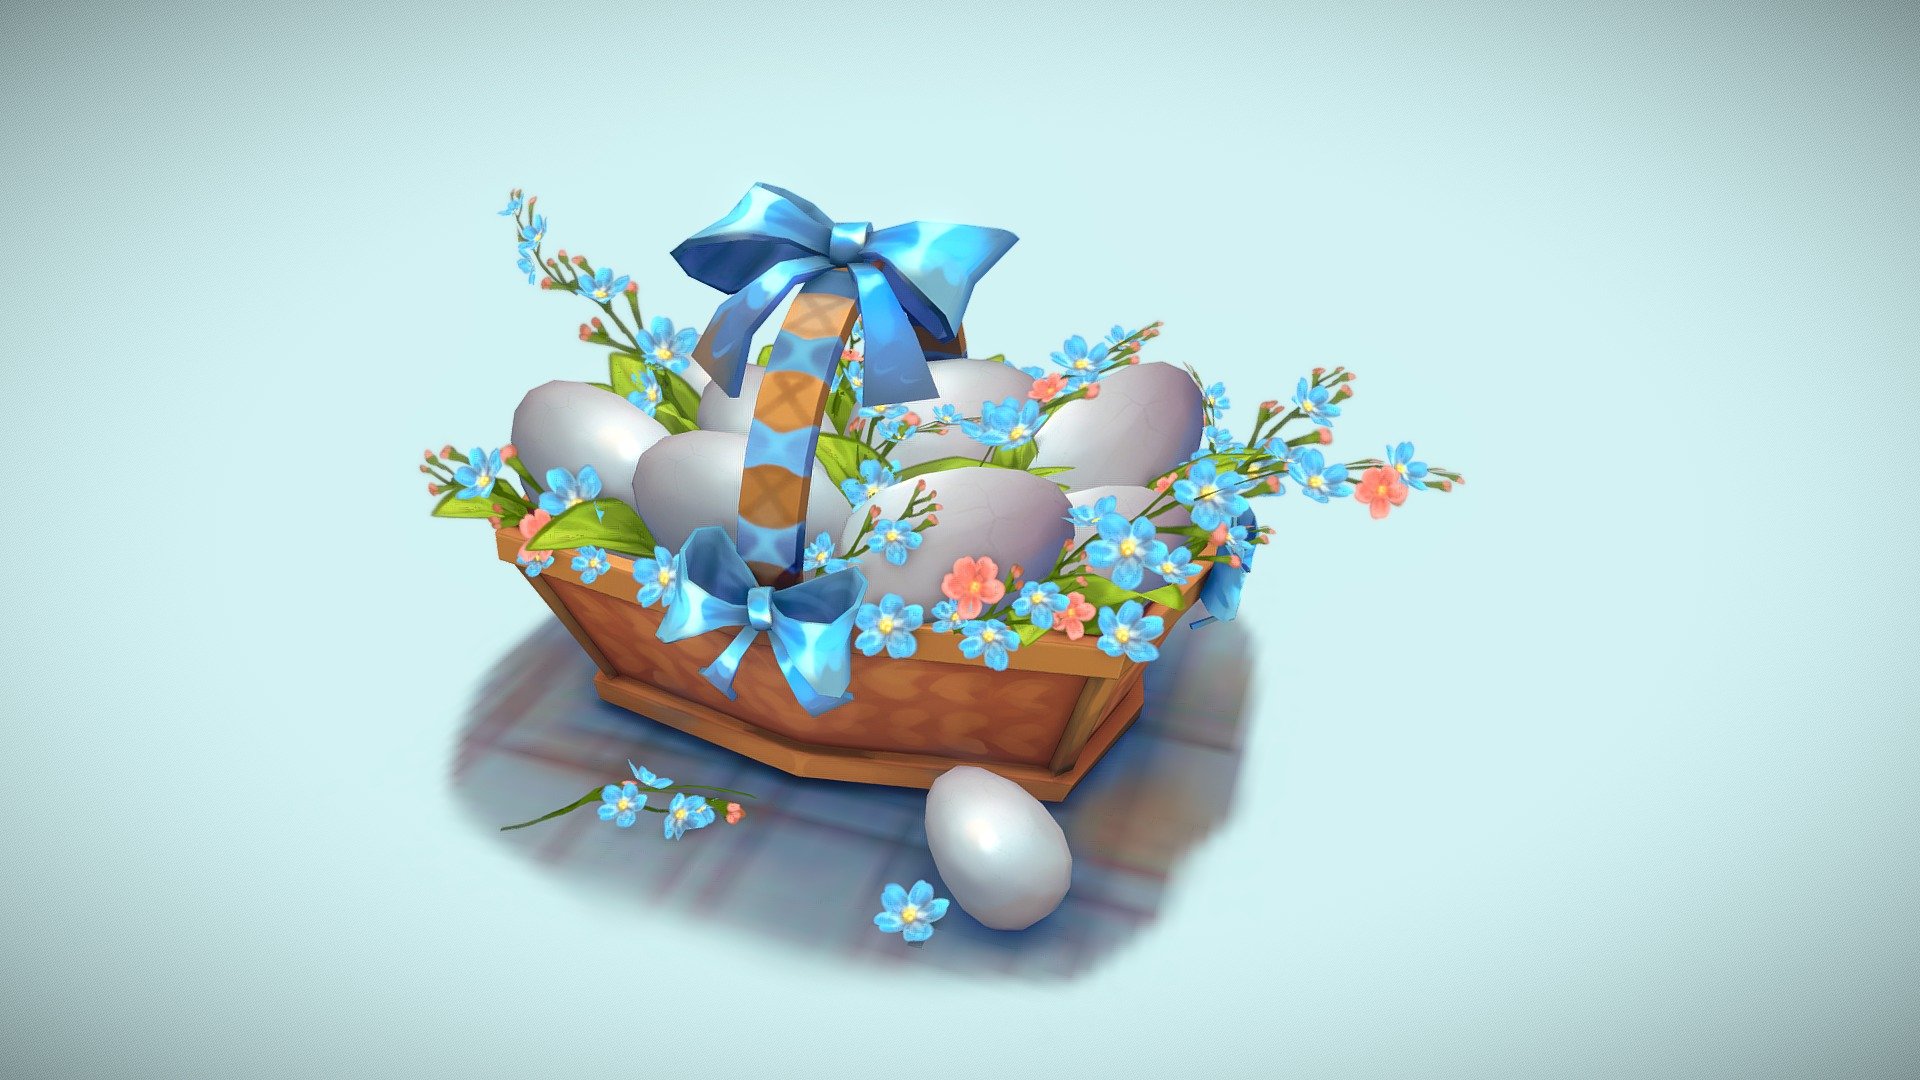 Basket with eggs, texture 1012 - Easter eggs - 3D model by CHL (@chl_) 3d model